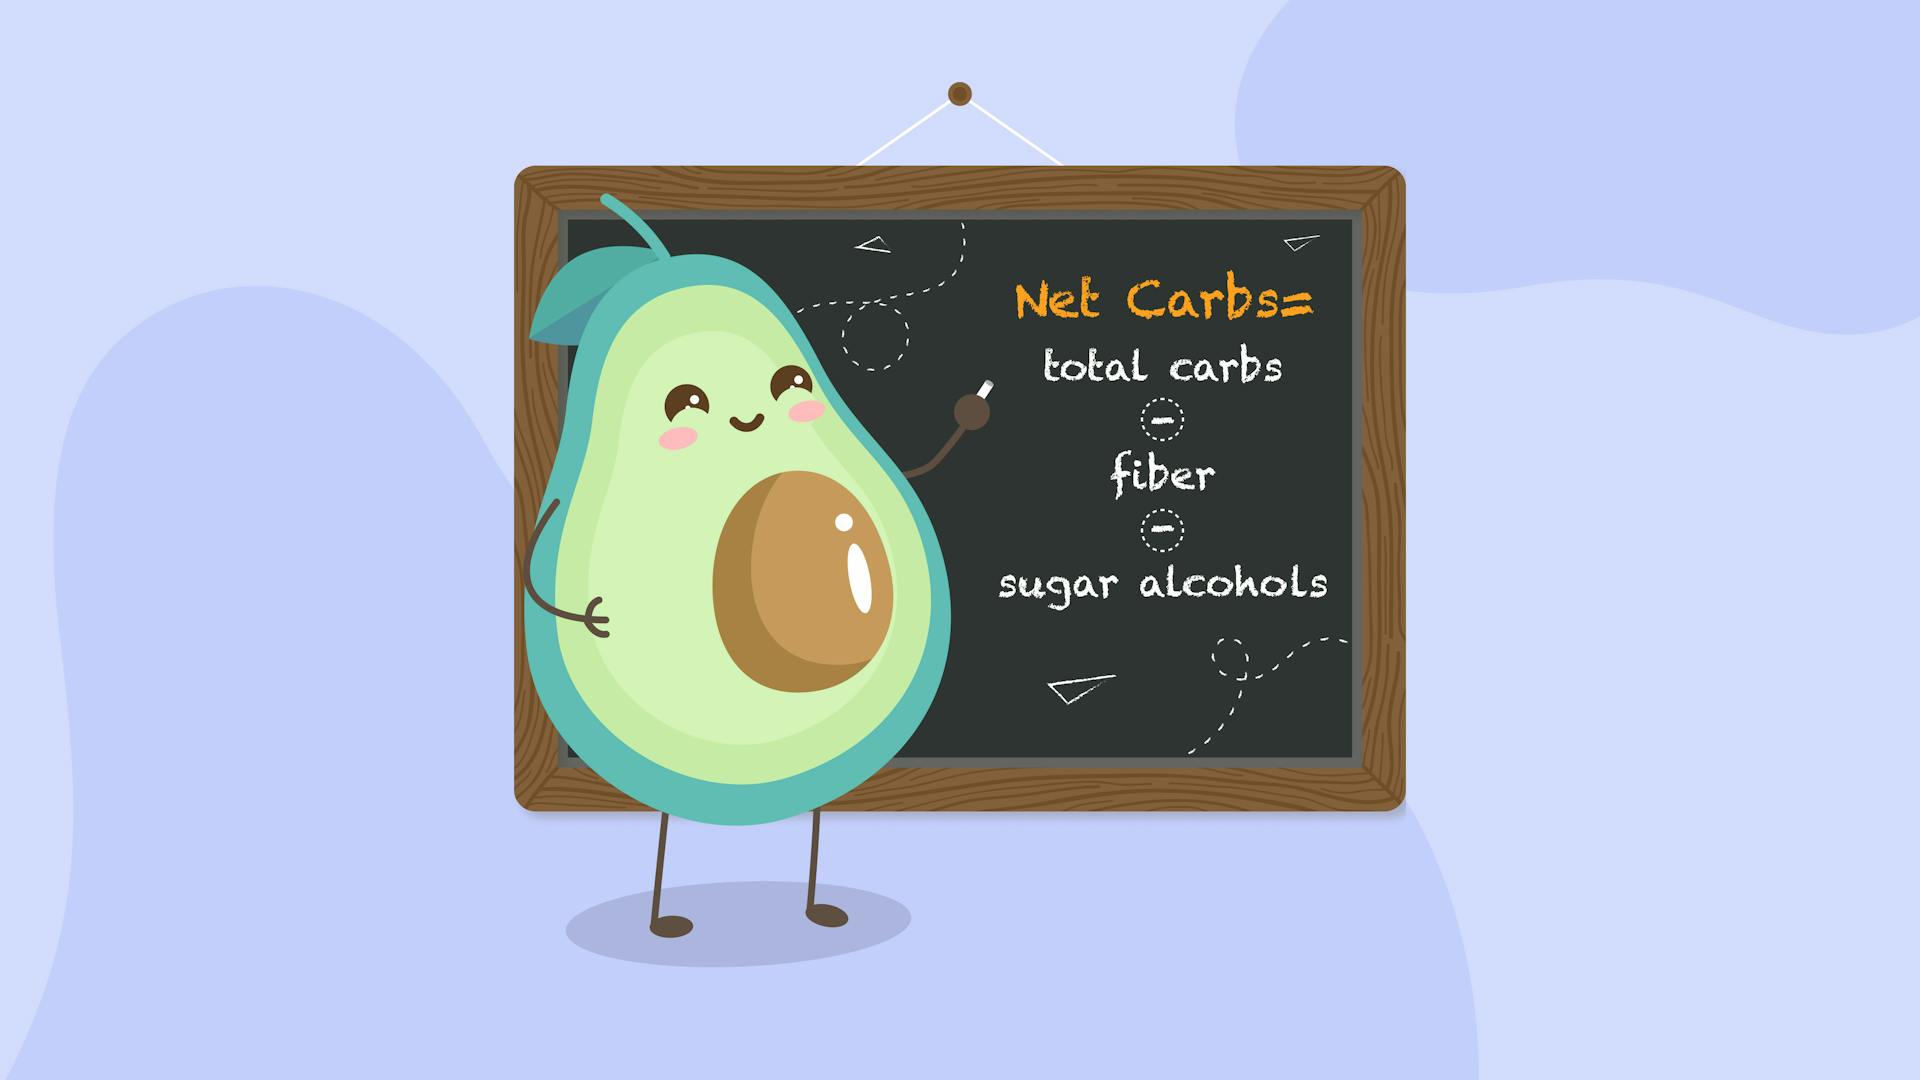 Net Carbs vs. Total Carbs: How Many Net Carbs Can You Have on Keto?